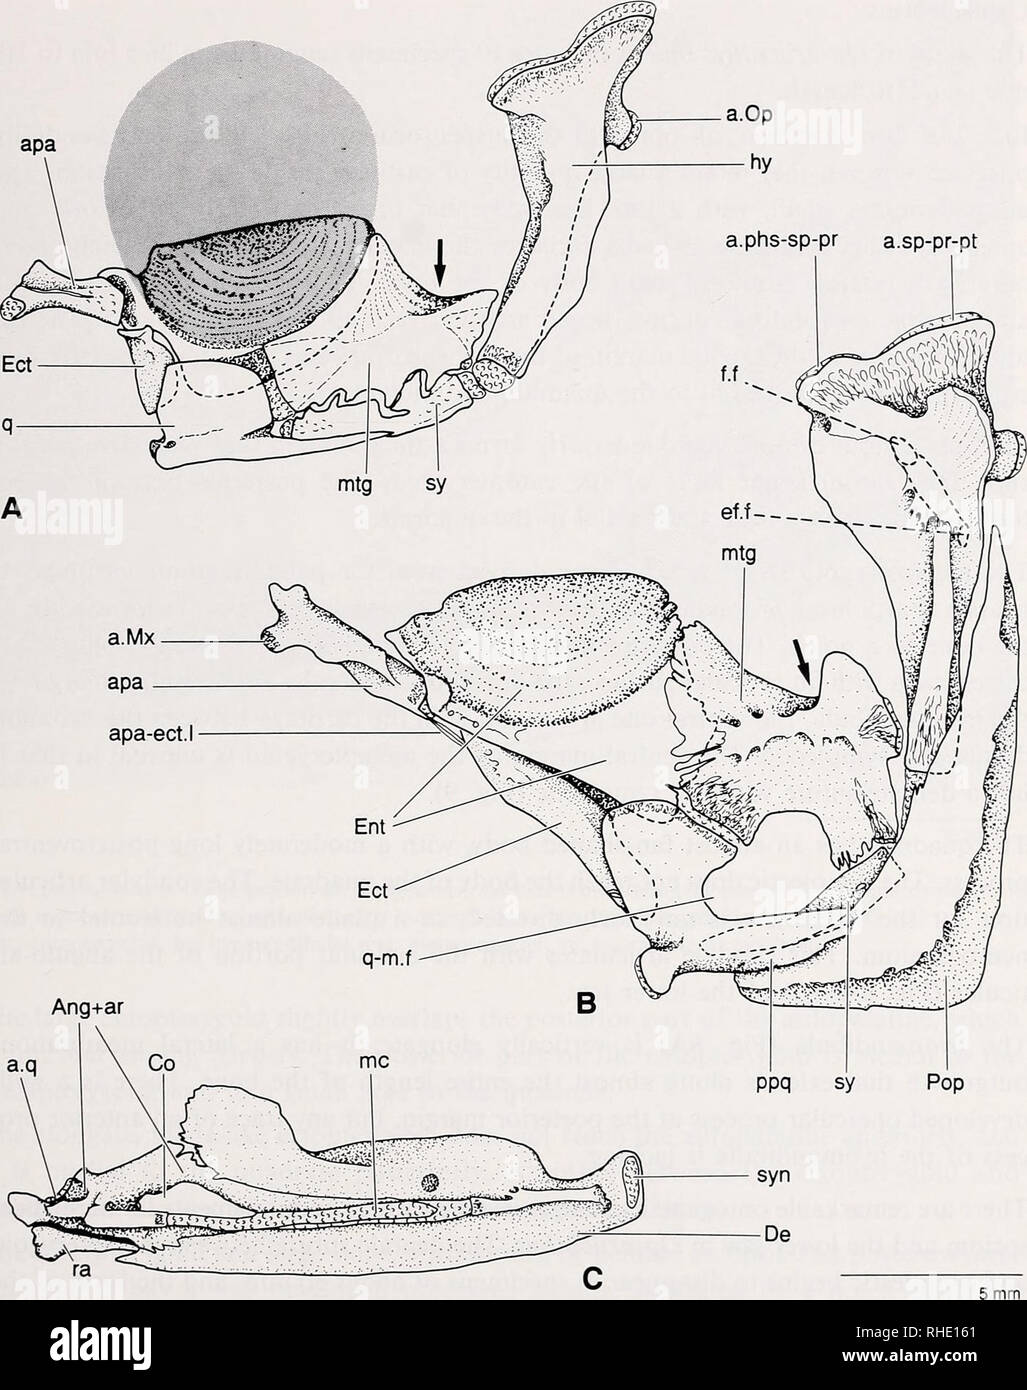 . Bonner zoologische Monographien. Zoology. 25. Fig.8: Suspensorium and lower jaw of Opsariichthys bidens; dotted area represents the position of the eye. — A: Suspensorium, lateral view (26.5 mm standard length; PC 22); B: Suspensorium, lateral view (120 mm stan- dard length; CAS-SU 32512); C: Lower jaw, medial view (120 mm standard length; PC 32512). Arrows point to a notch. Scale applies to the entire figure. Ang + ar: angulo-articular; a.Mx; articular facet for maxilla; a.Op: articular facet for opercle; apa: autopalatine; apa-ect.l: autopalatine-ectopterygoid ligament; a.phs-sp-pr: articu Stock Photo